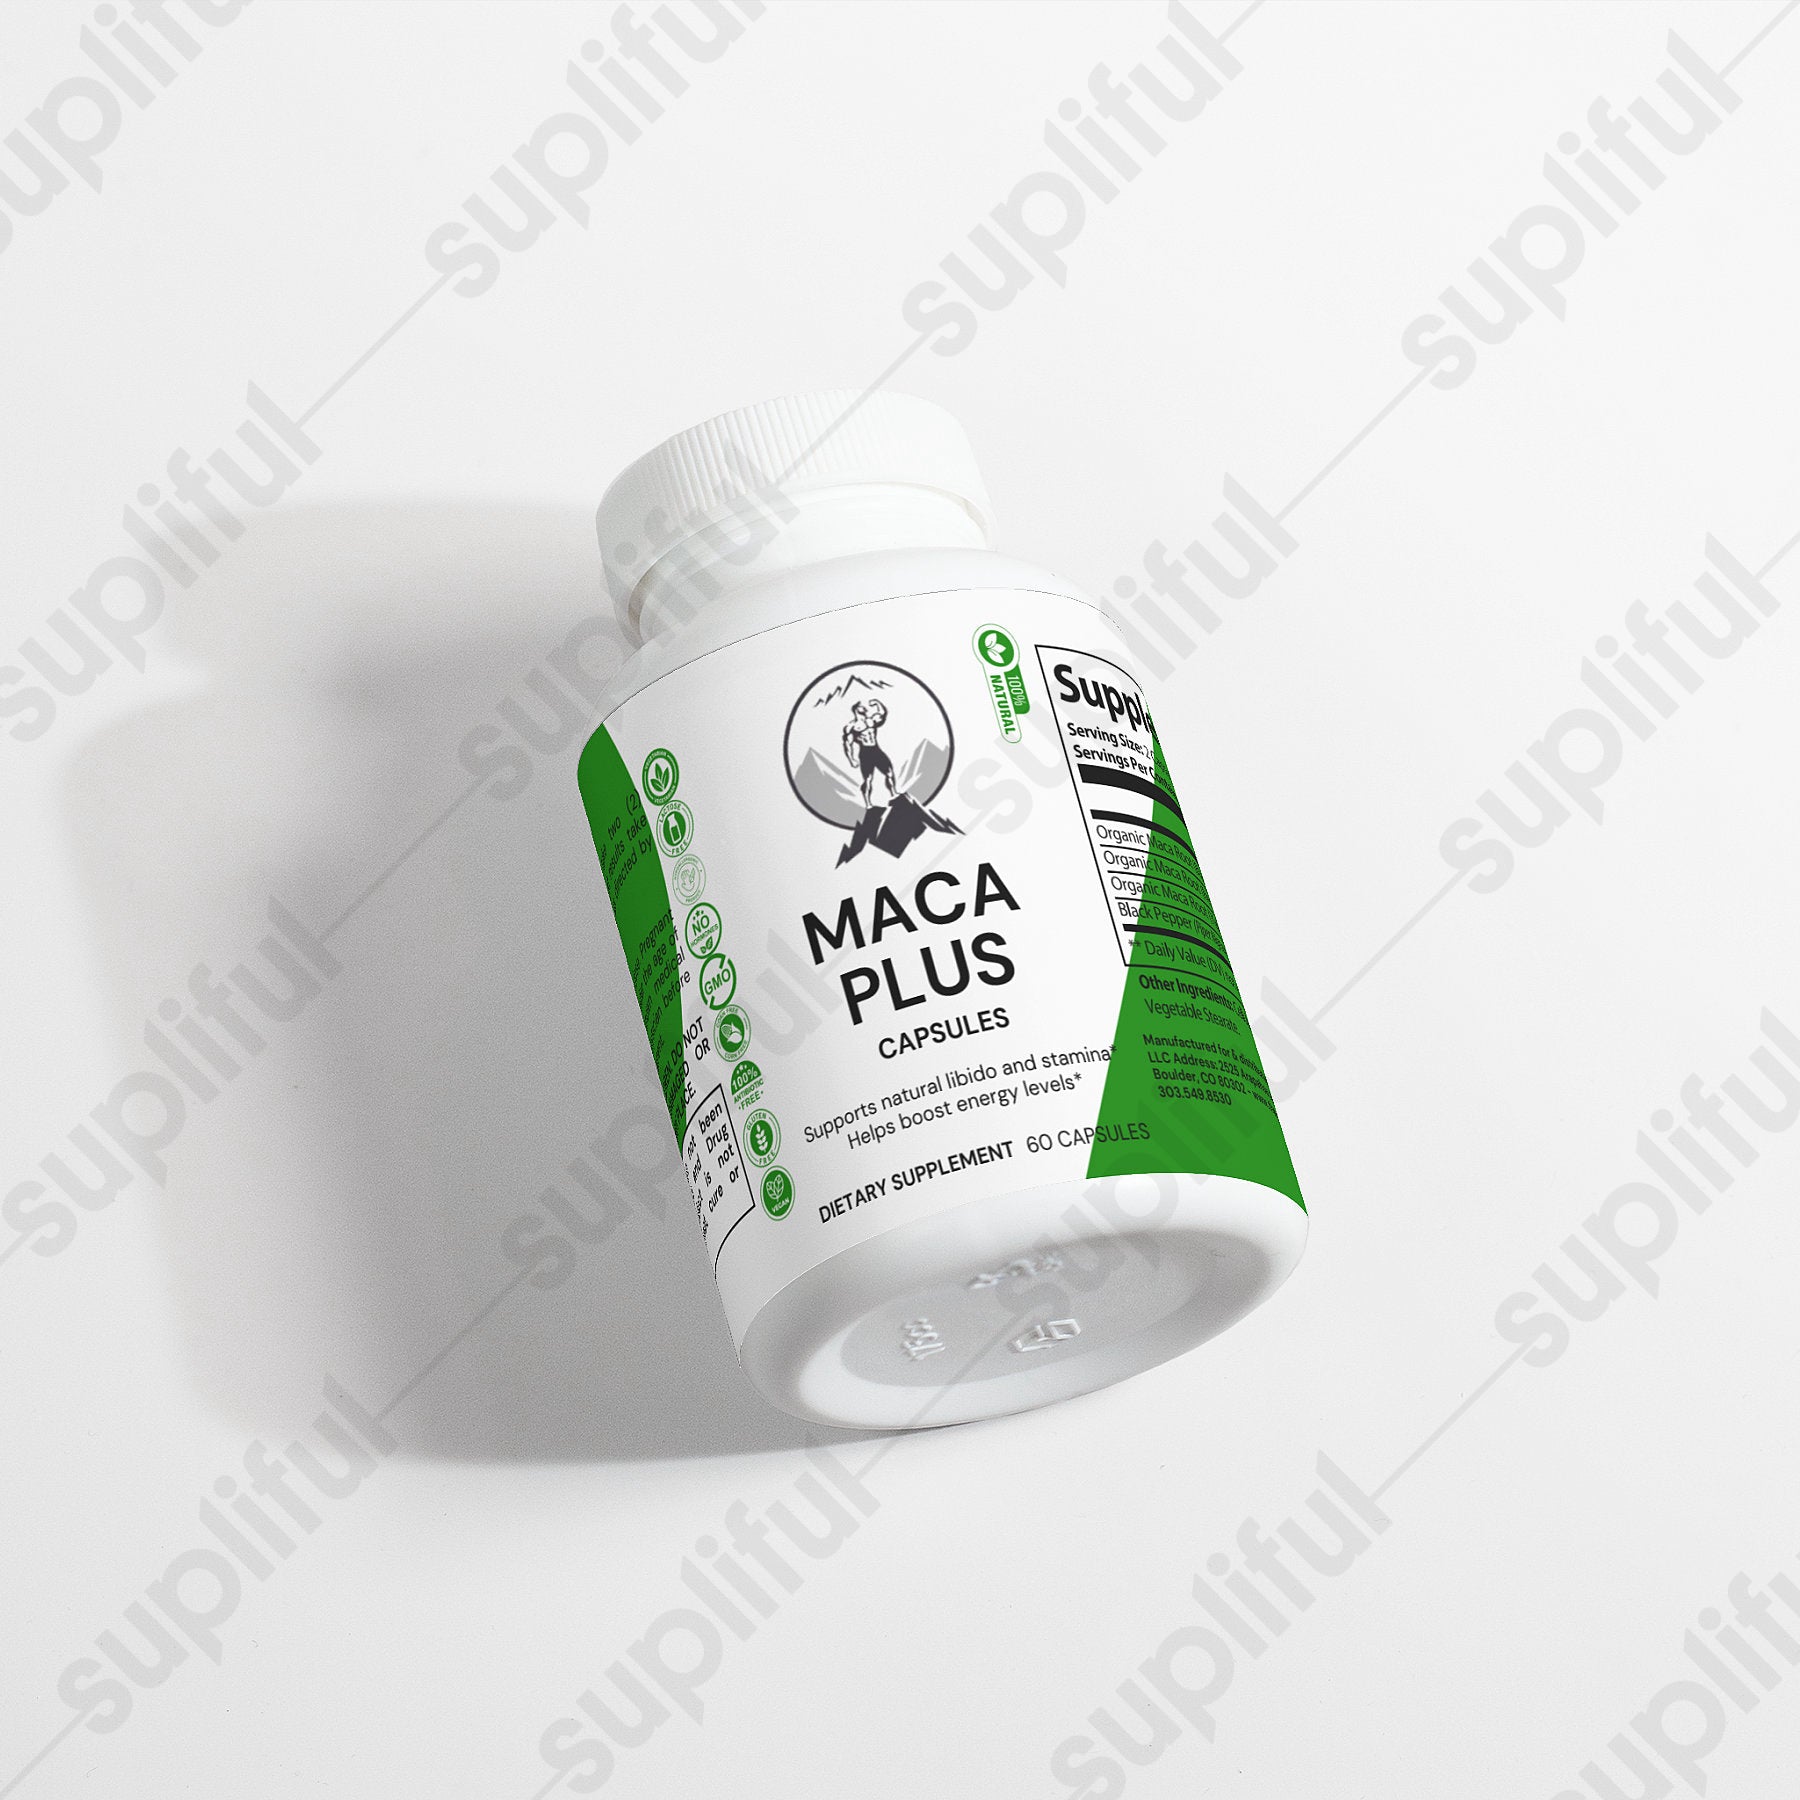 Maca PlusNatural ExtractsHistorically, maca health benefits include improving fertility issues and sexual dysfunction, boosting energy levels, and bracing athletic performance. Maca Plus is MacaThe Rocky Ranger